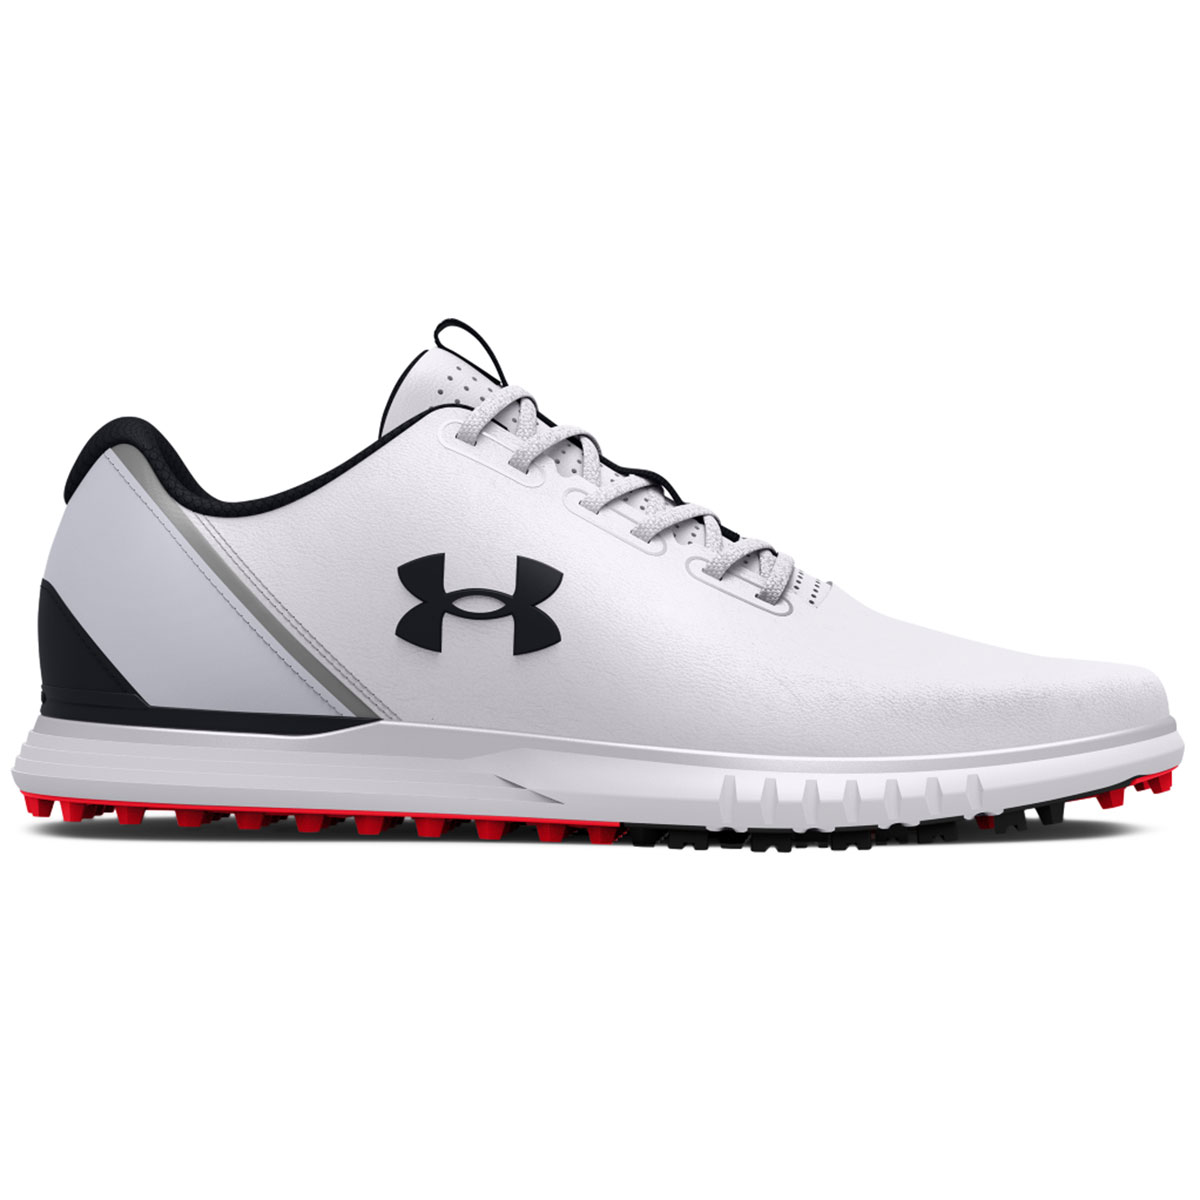 Under Armour Men's Medal Spikeless Golf Shoes from american golf